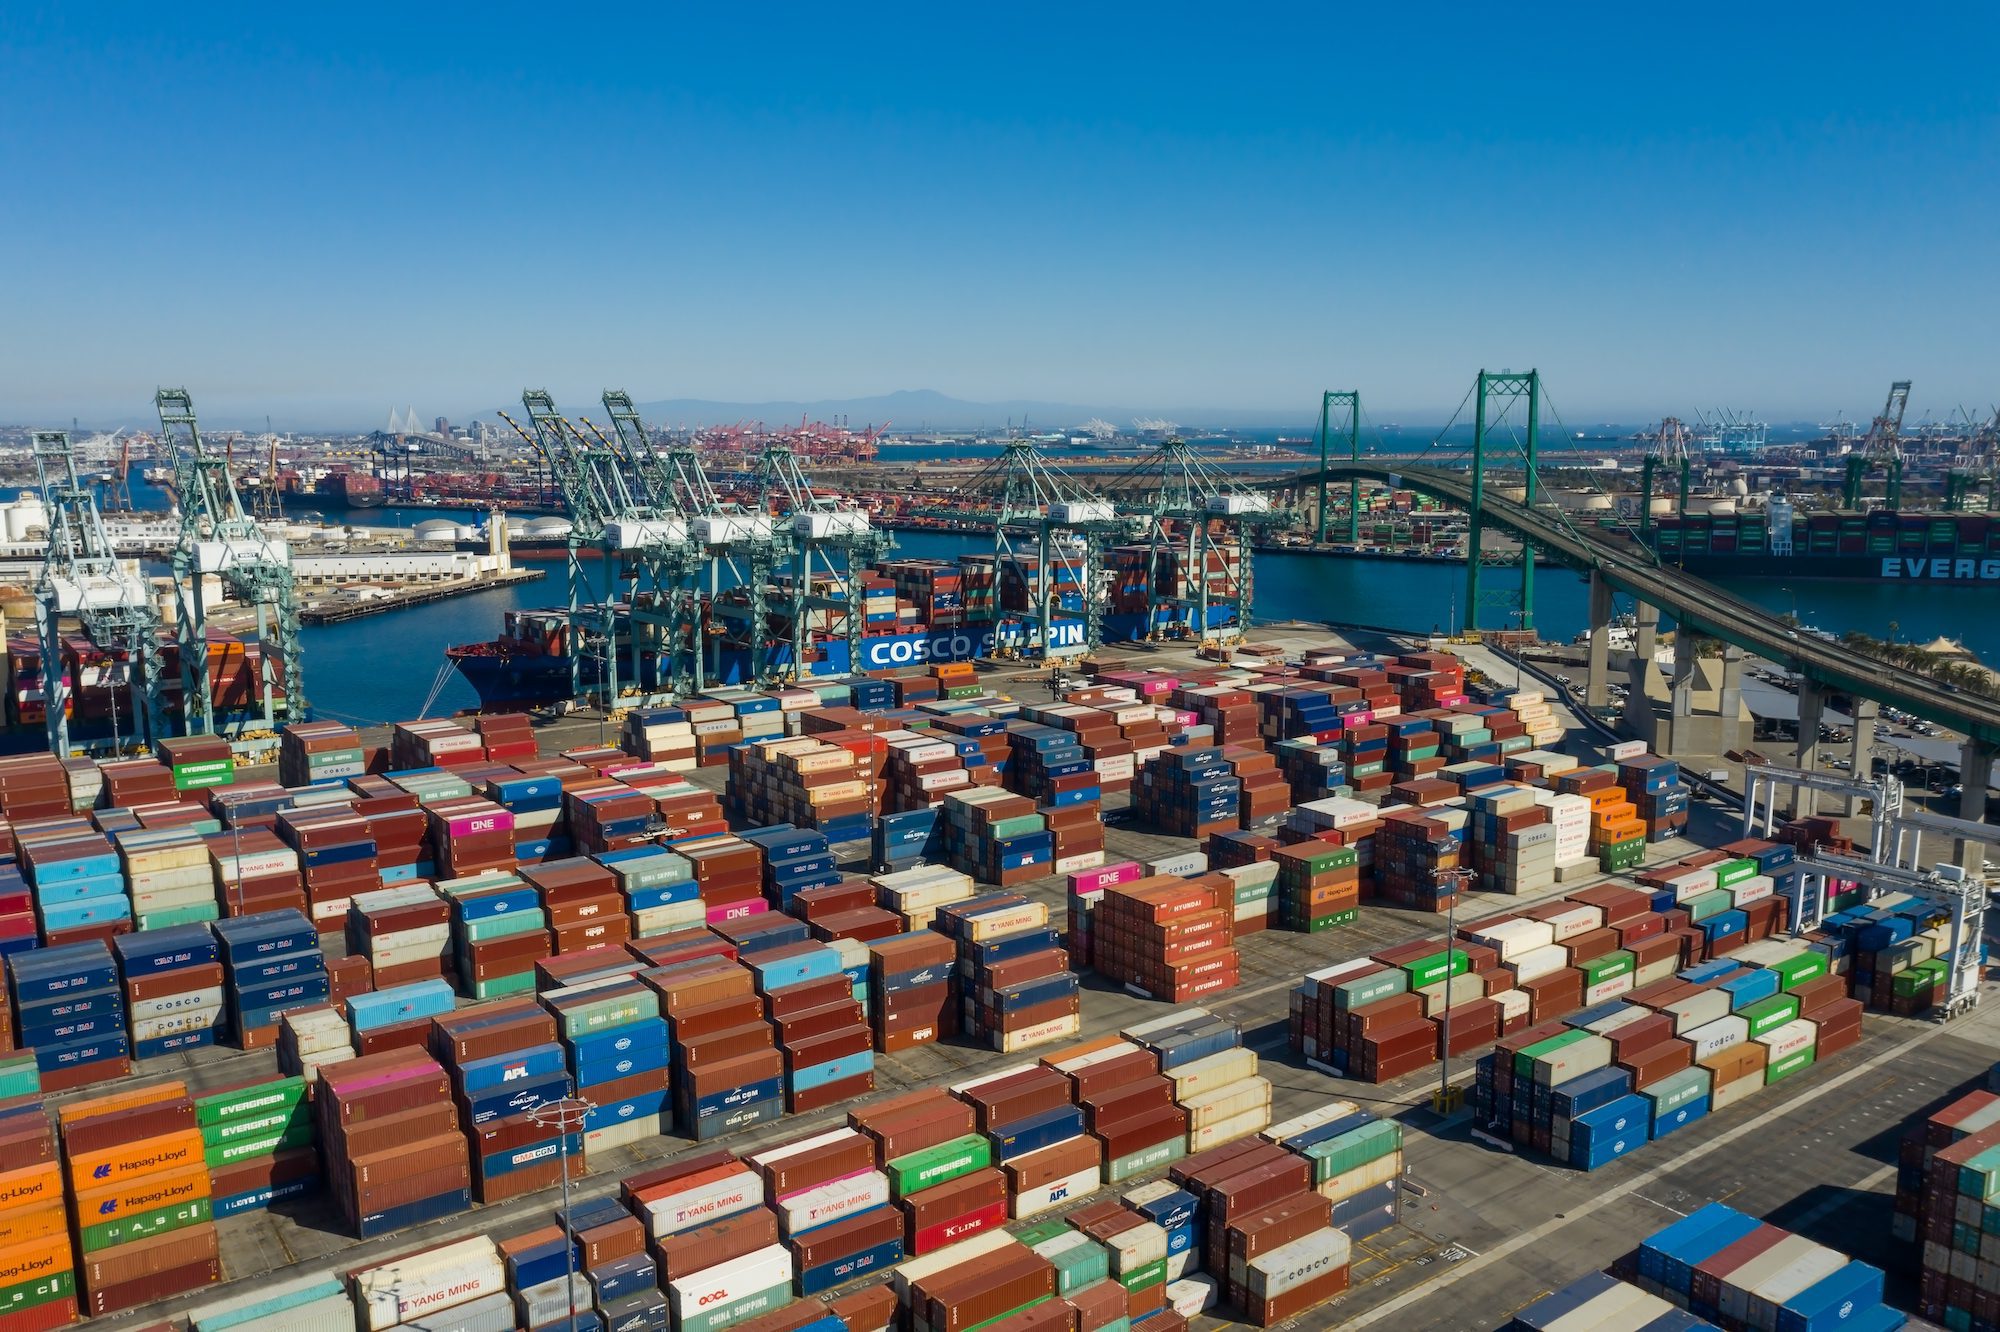 Alarm Over Rising Container Dwell Times at West Coast Ports Prompts Calls for More Rail Support